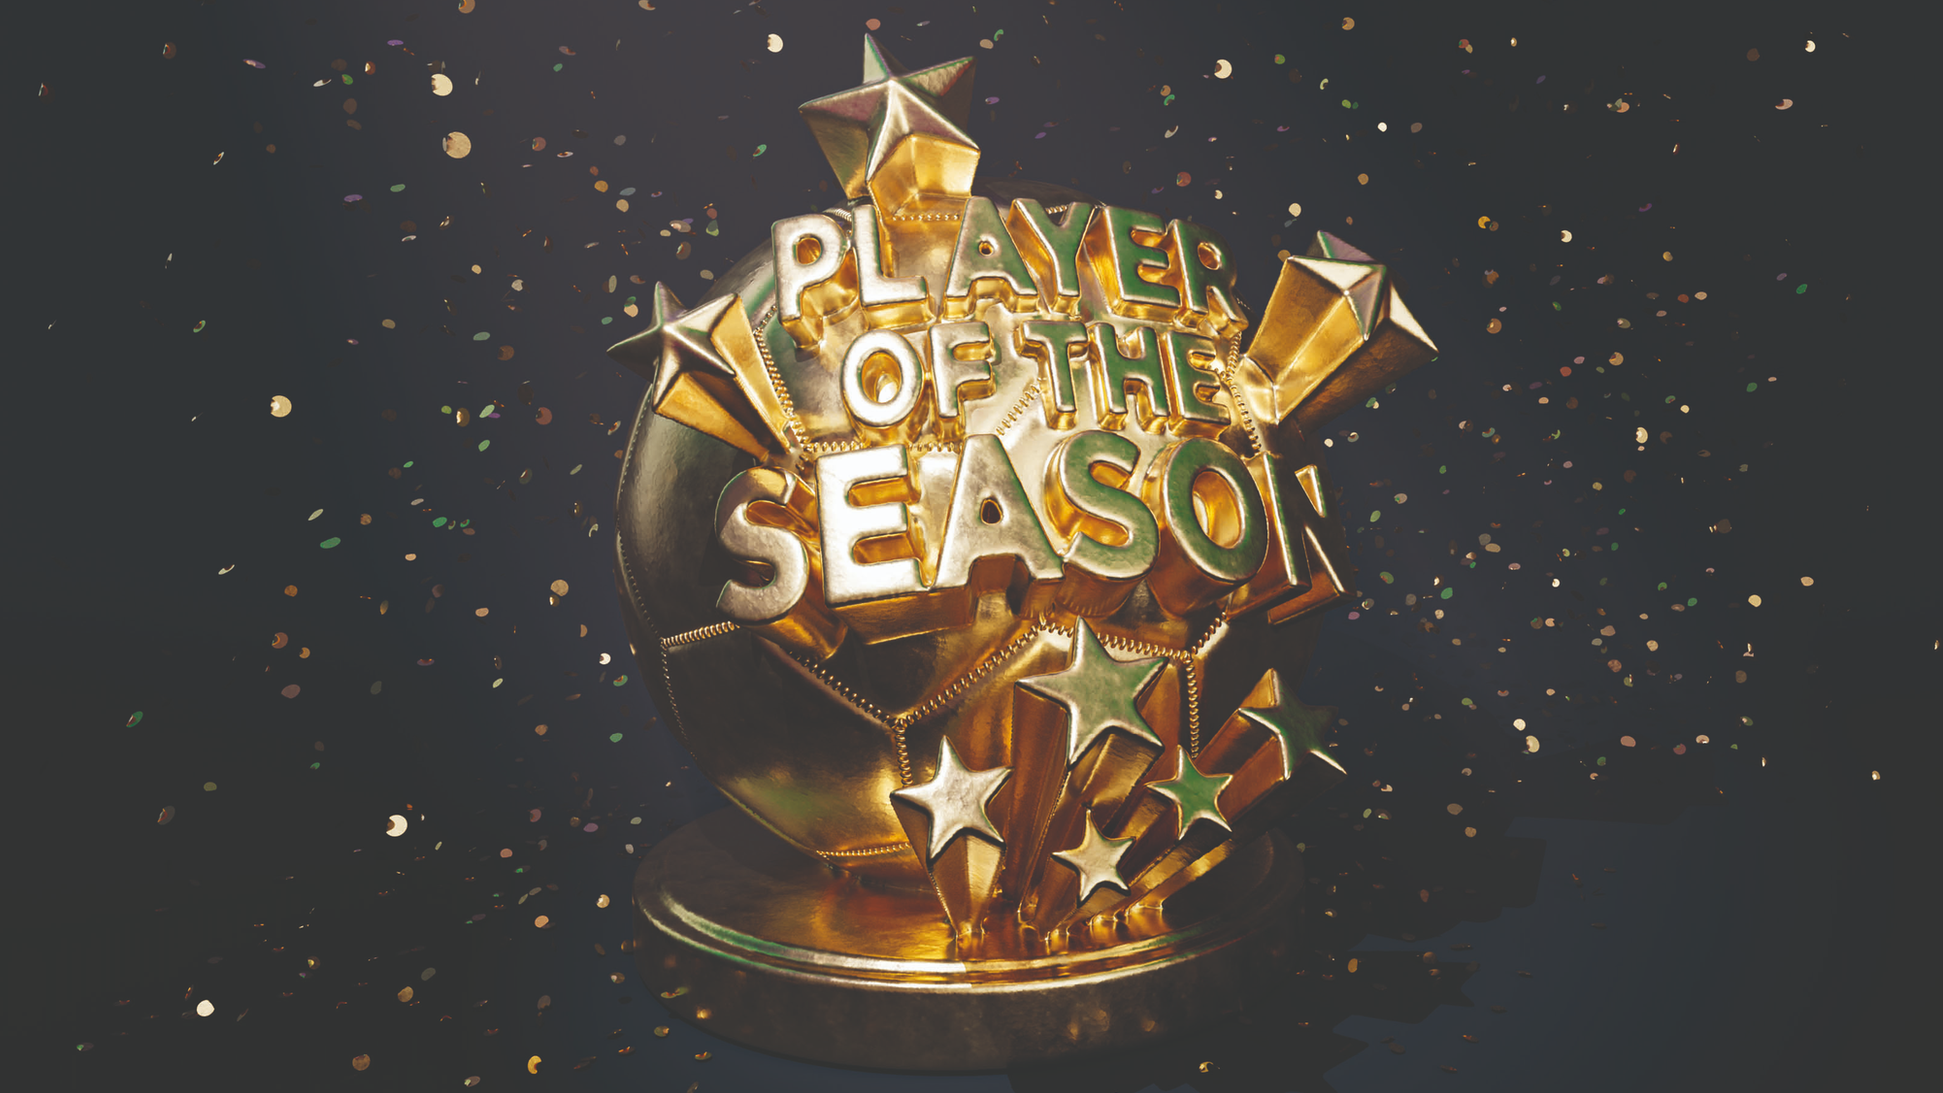 Vote for your Premier League club's player of the season from Wednesday